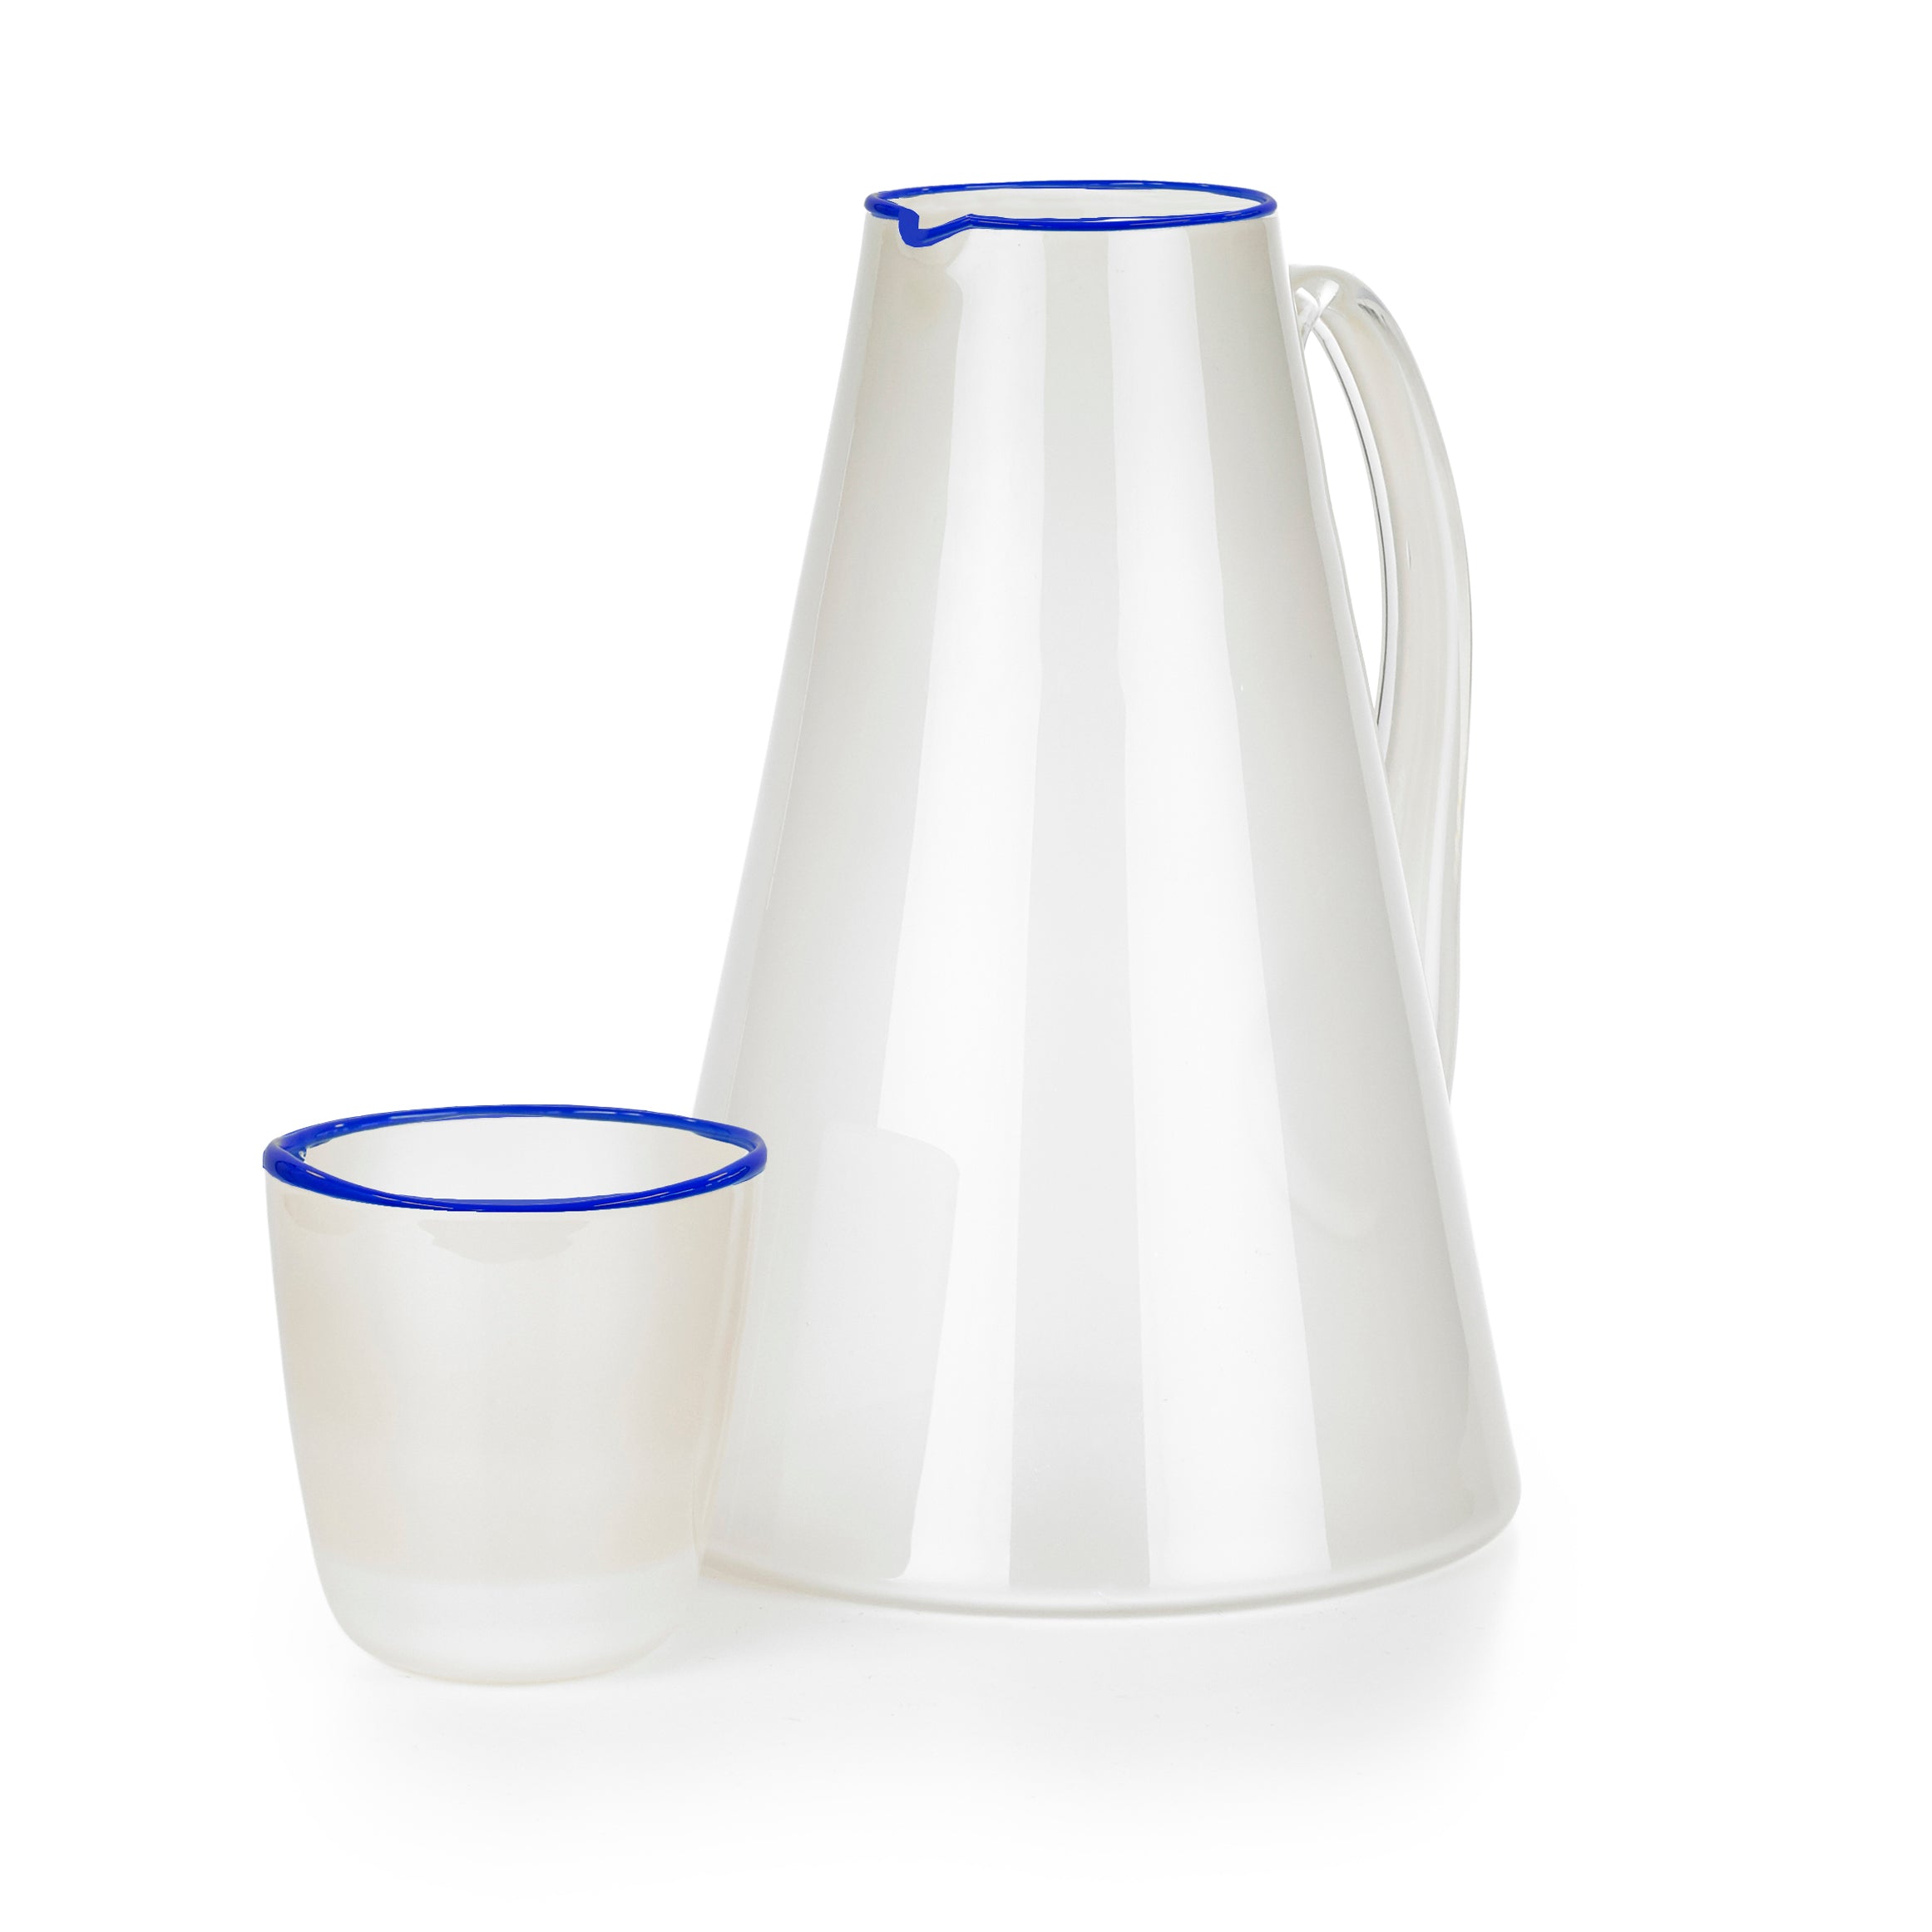 Handblown Bumba Glass in White with Royal Blue Rim, 30cl